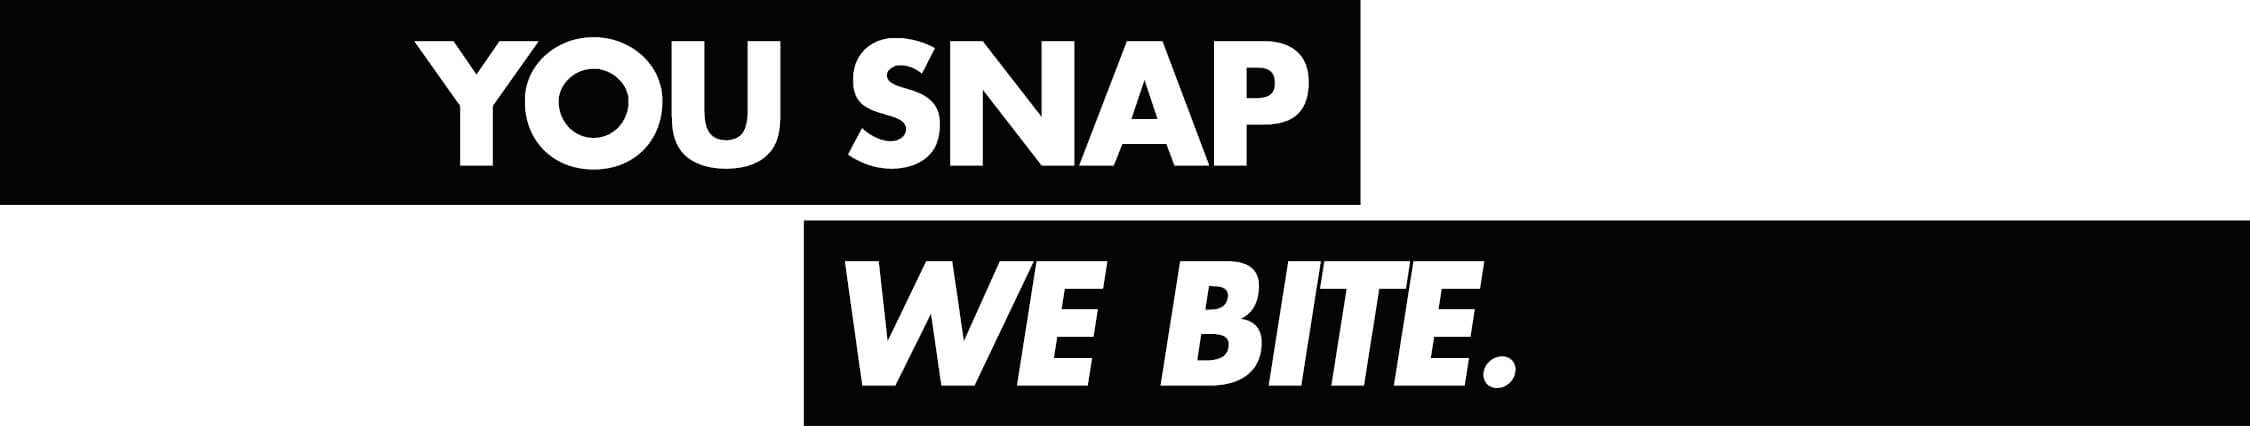 You snap, we bite.